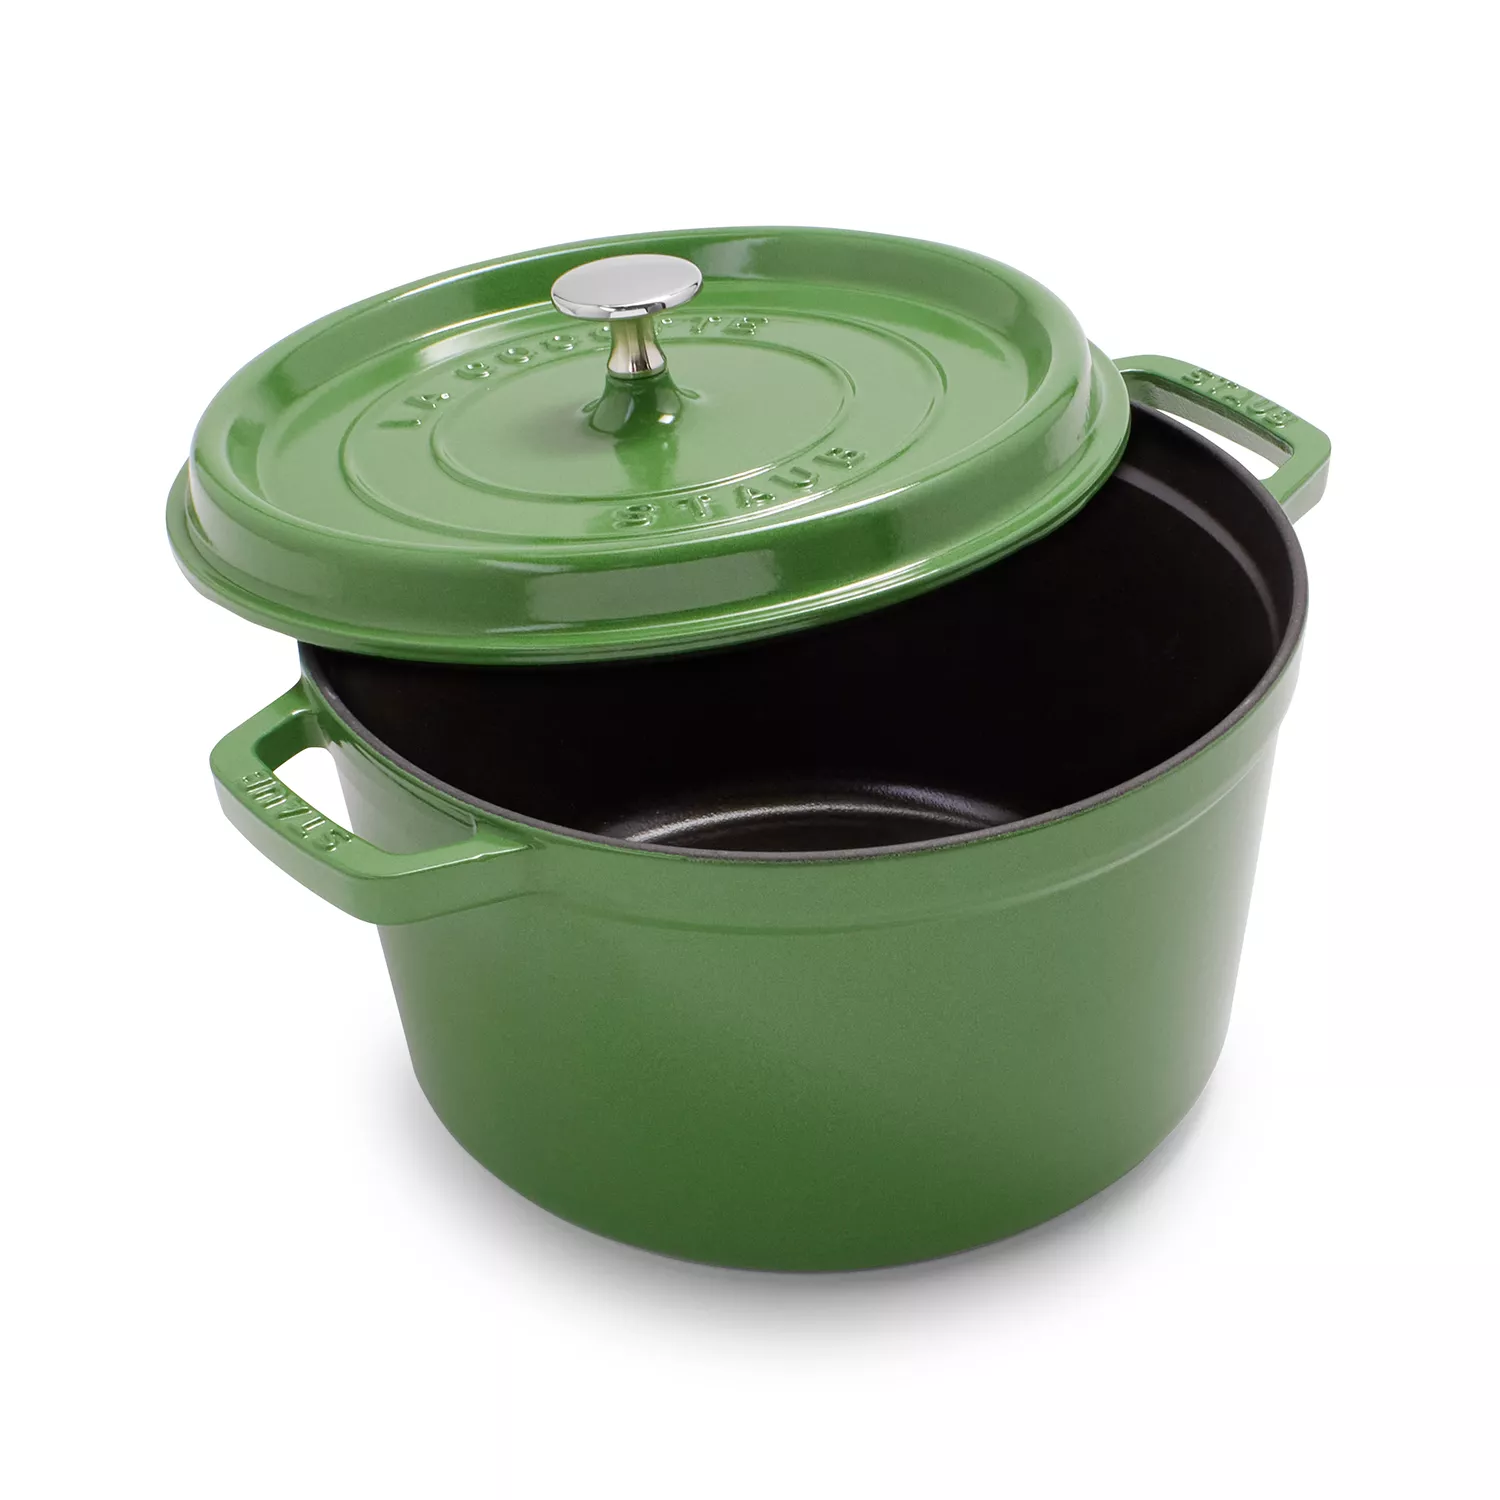 The @staub_usa 5 qt Deep Dutch Oven is 60% off right now! I picked